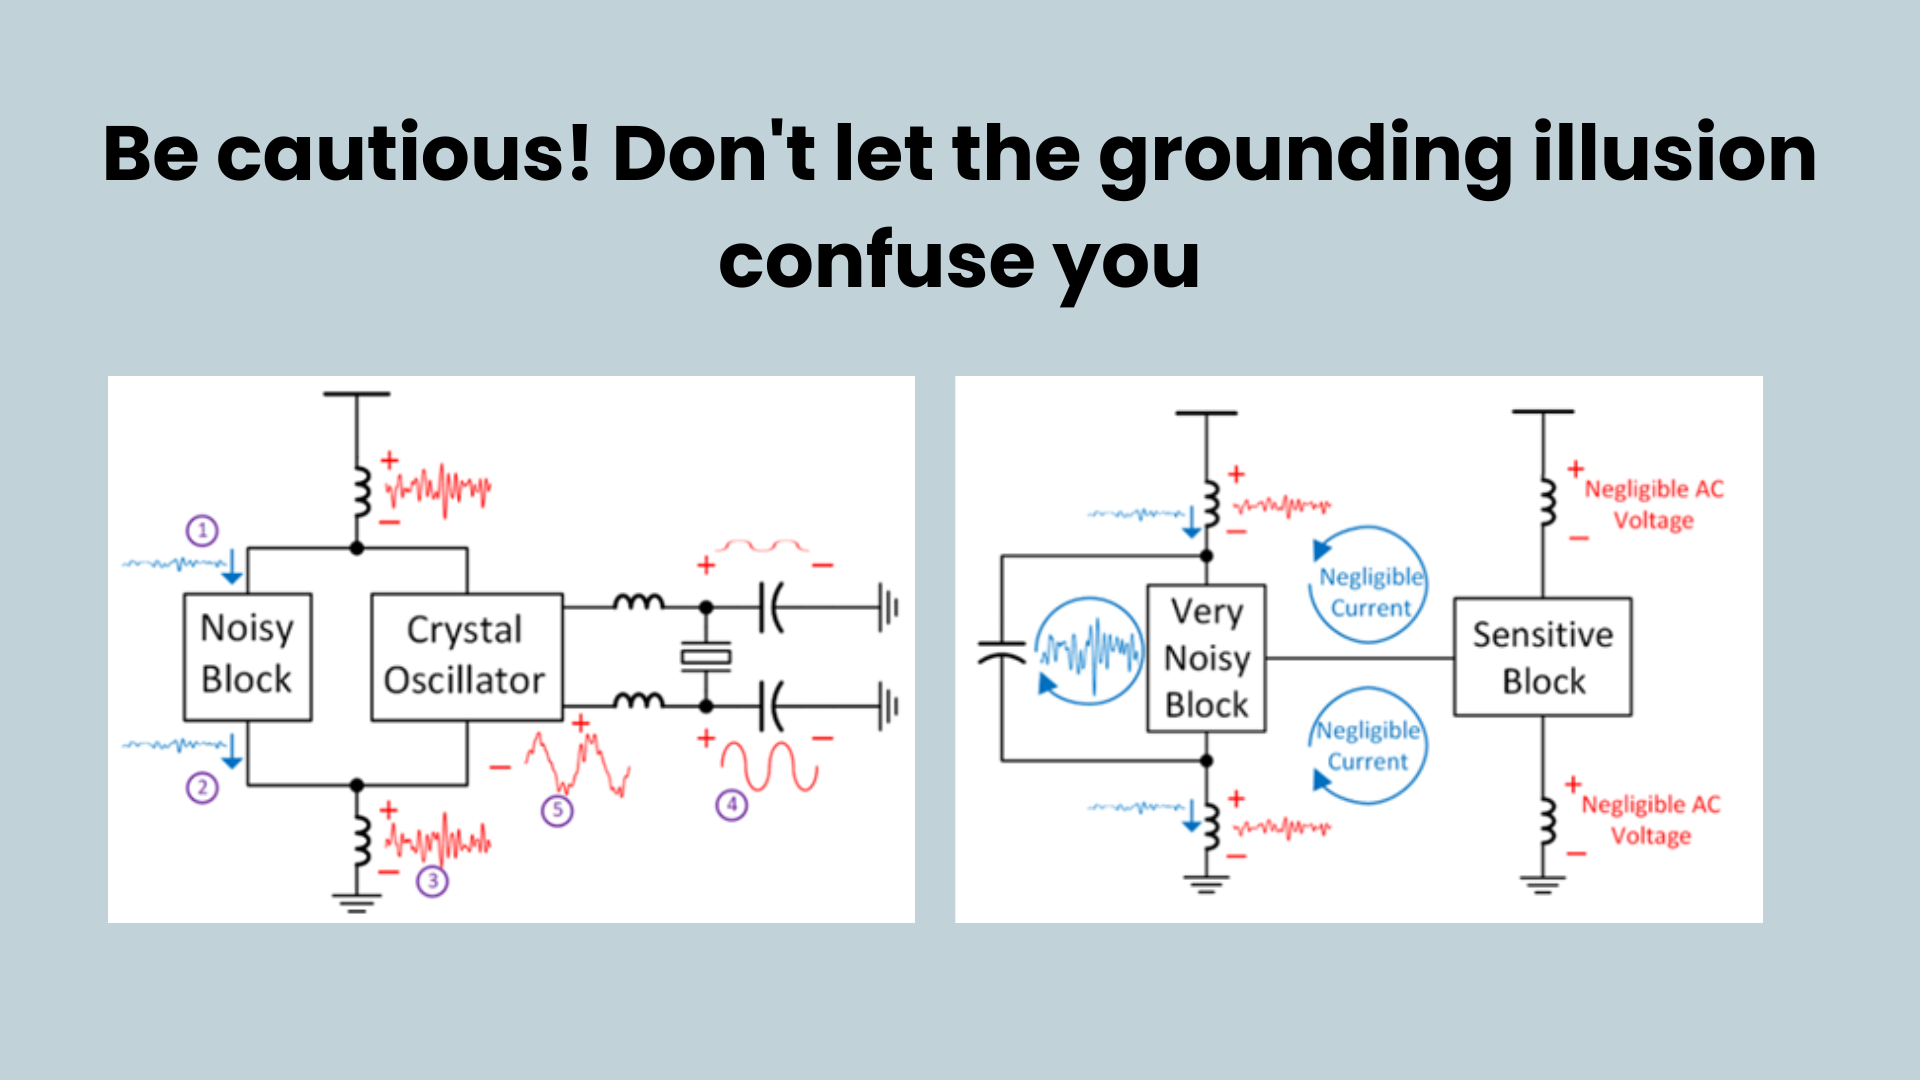 Be cautious! Don't let the grounding i.e. ground terminal illusion confuse you